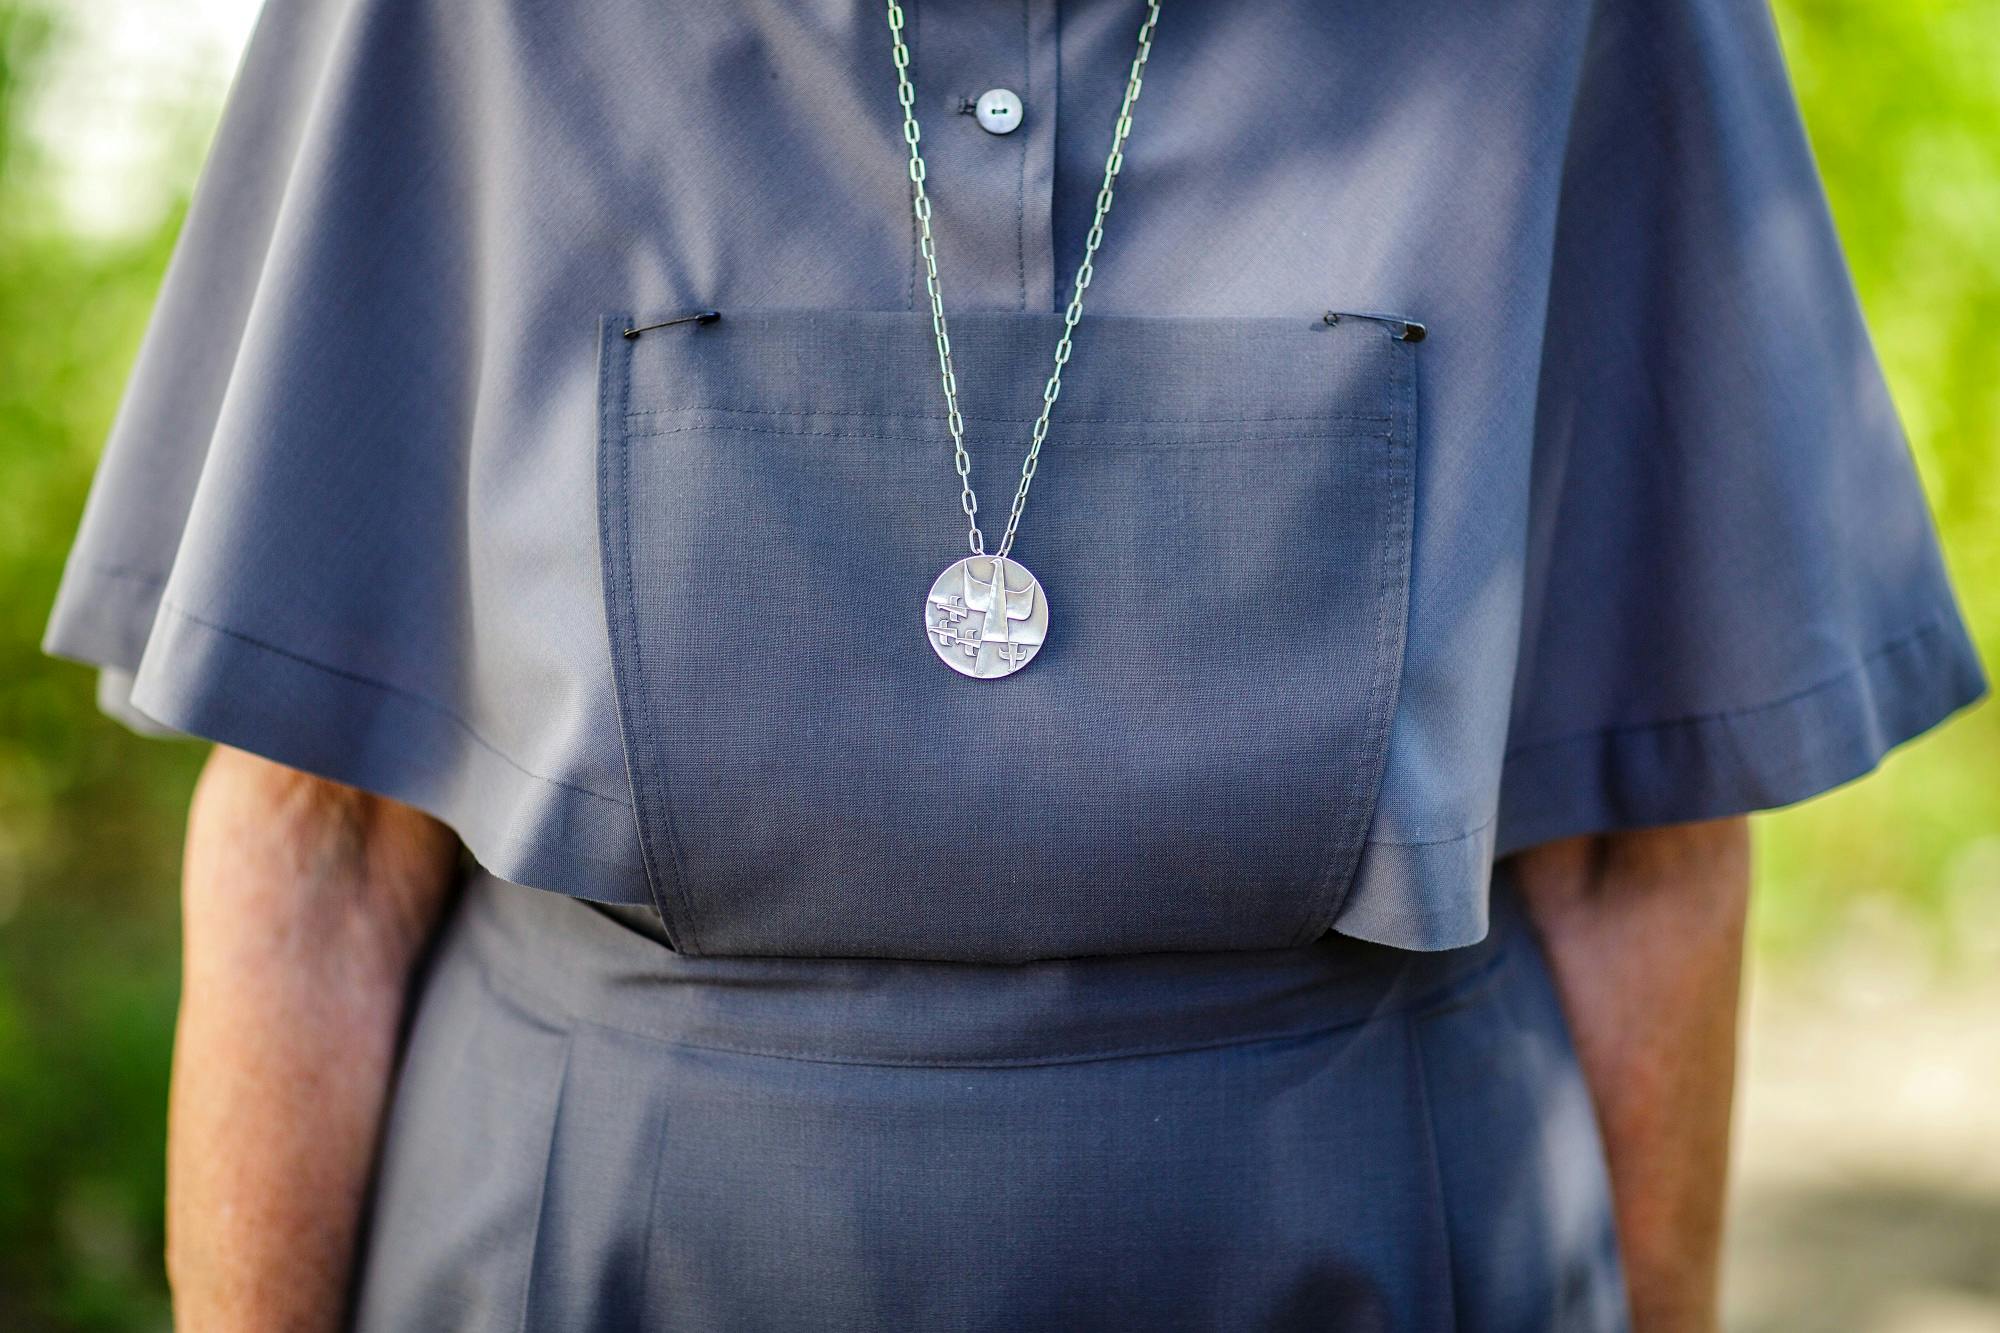 Person wears shirt with chain and round pendant.